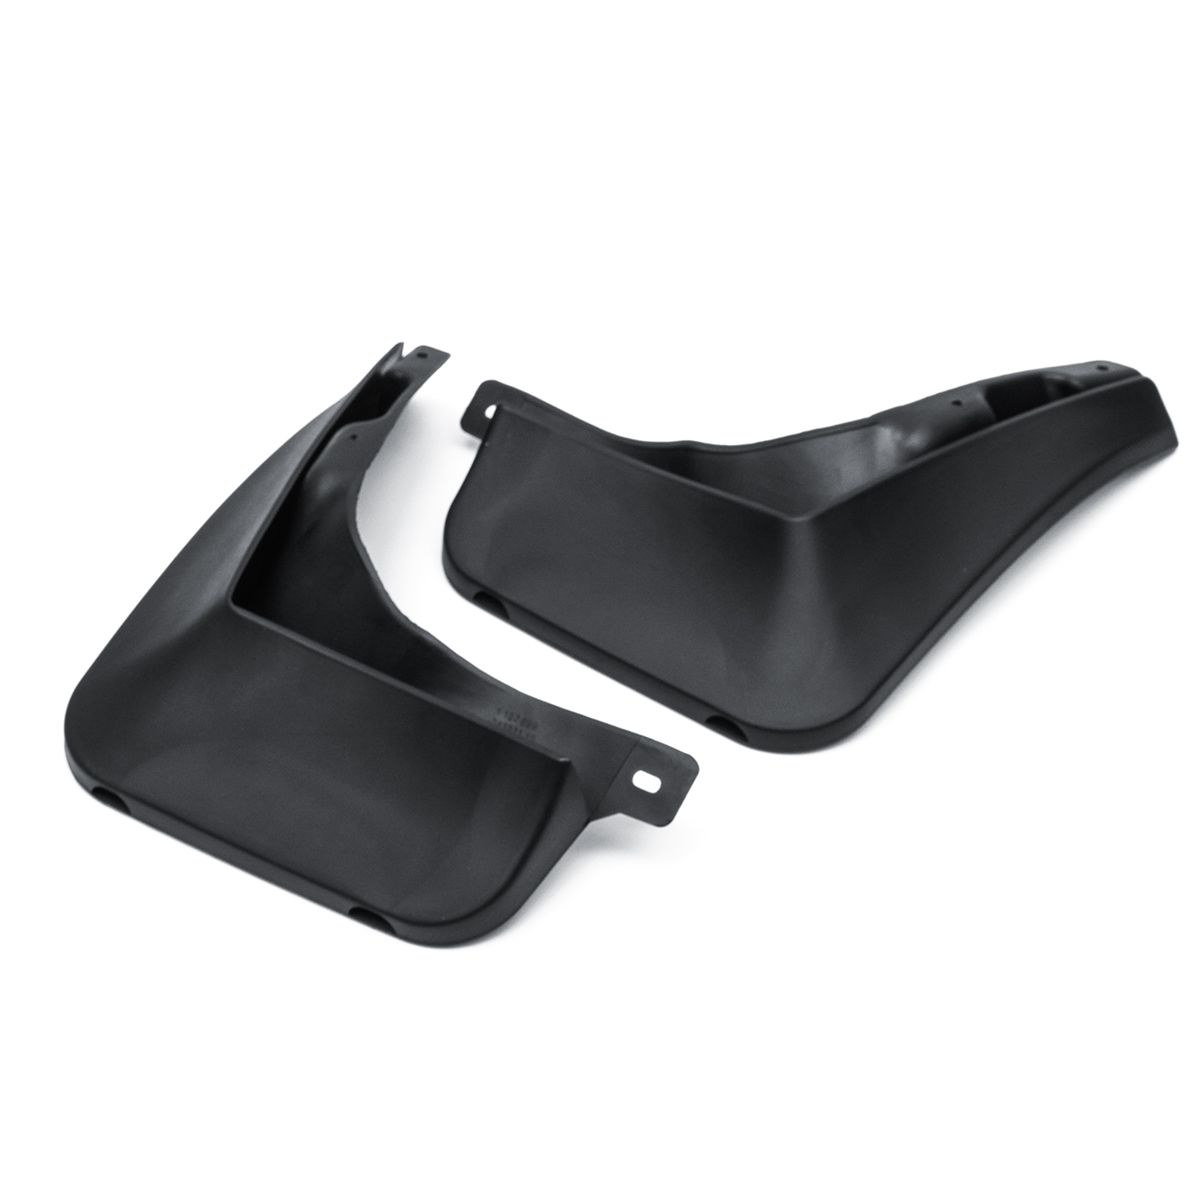 Front-And-Rear-Mud-Flaps-Car-Mudguards-For-BMW-5-SERIES-F10-2011-2016-1388943